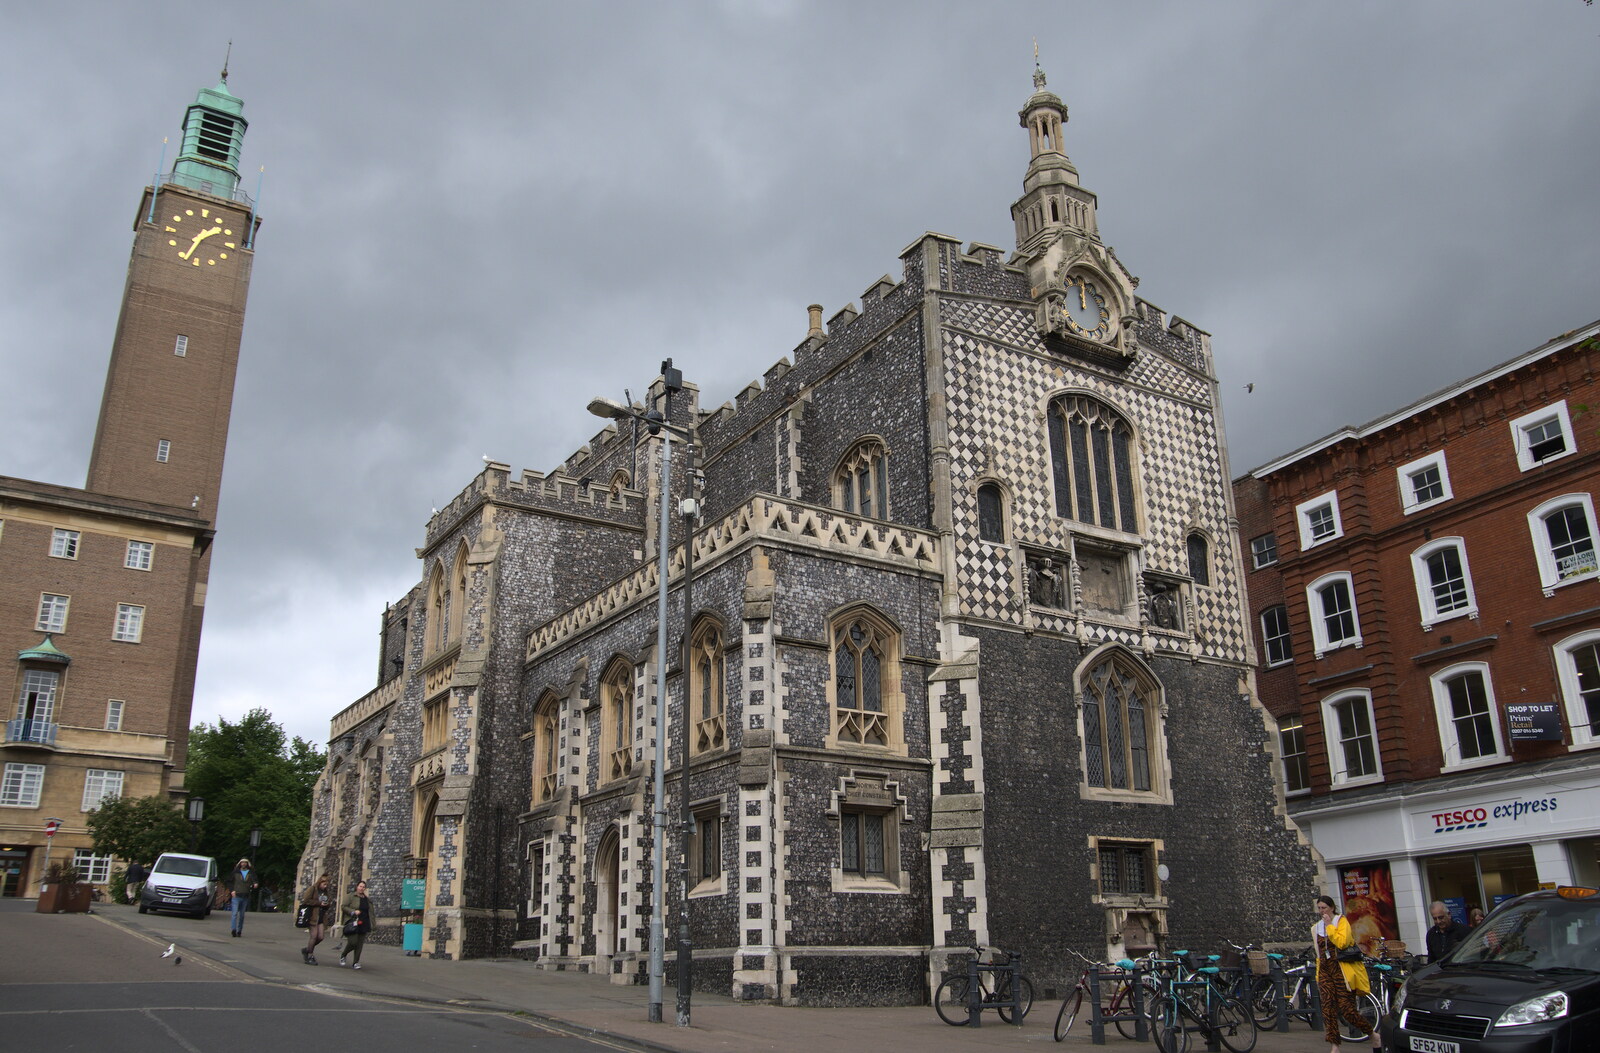 The Guildhall on Gaol Hill from Discovering the Hidden City: Norwich, Norfolk - 23rd May 2022